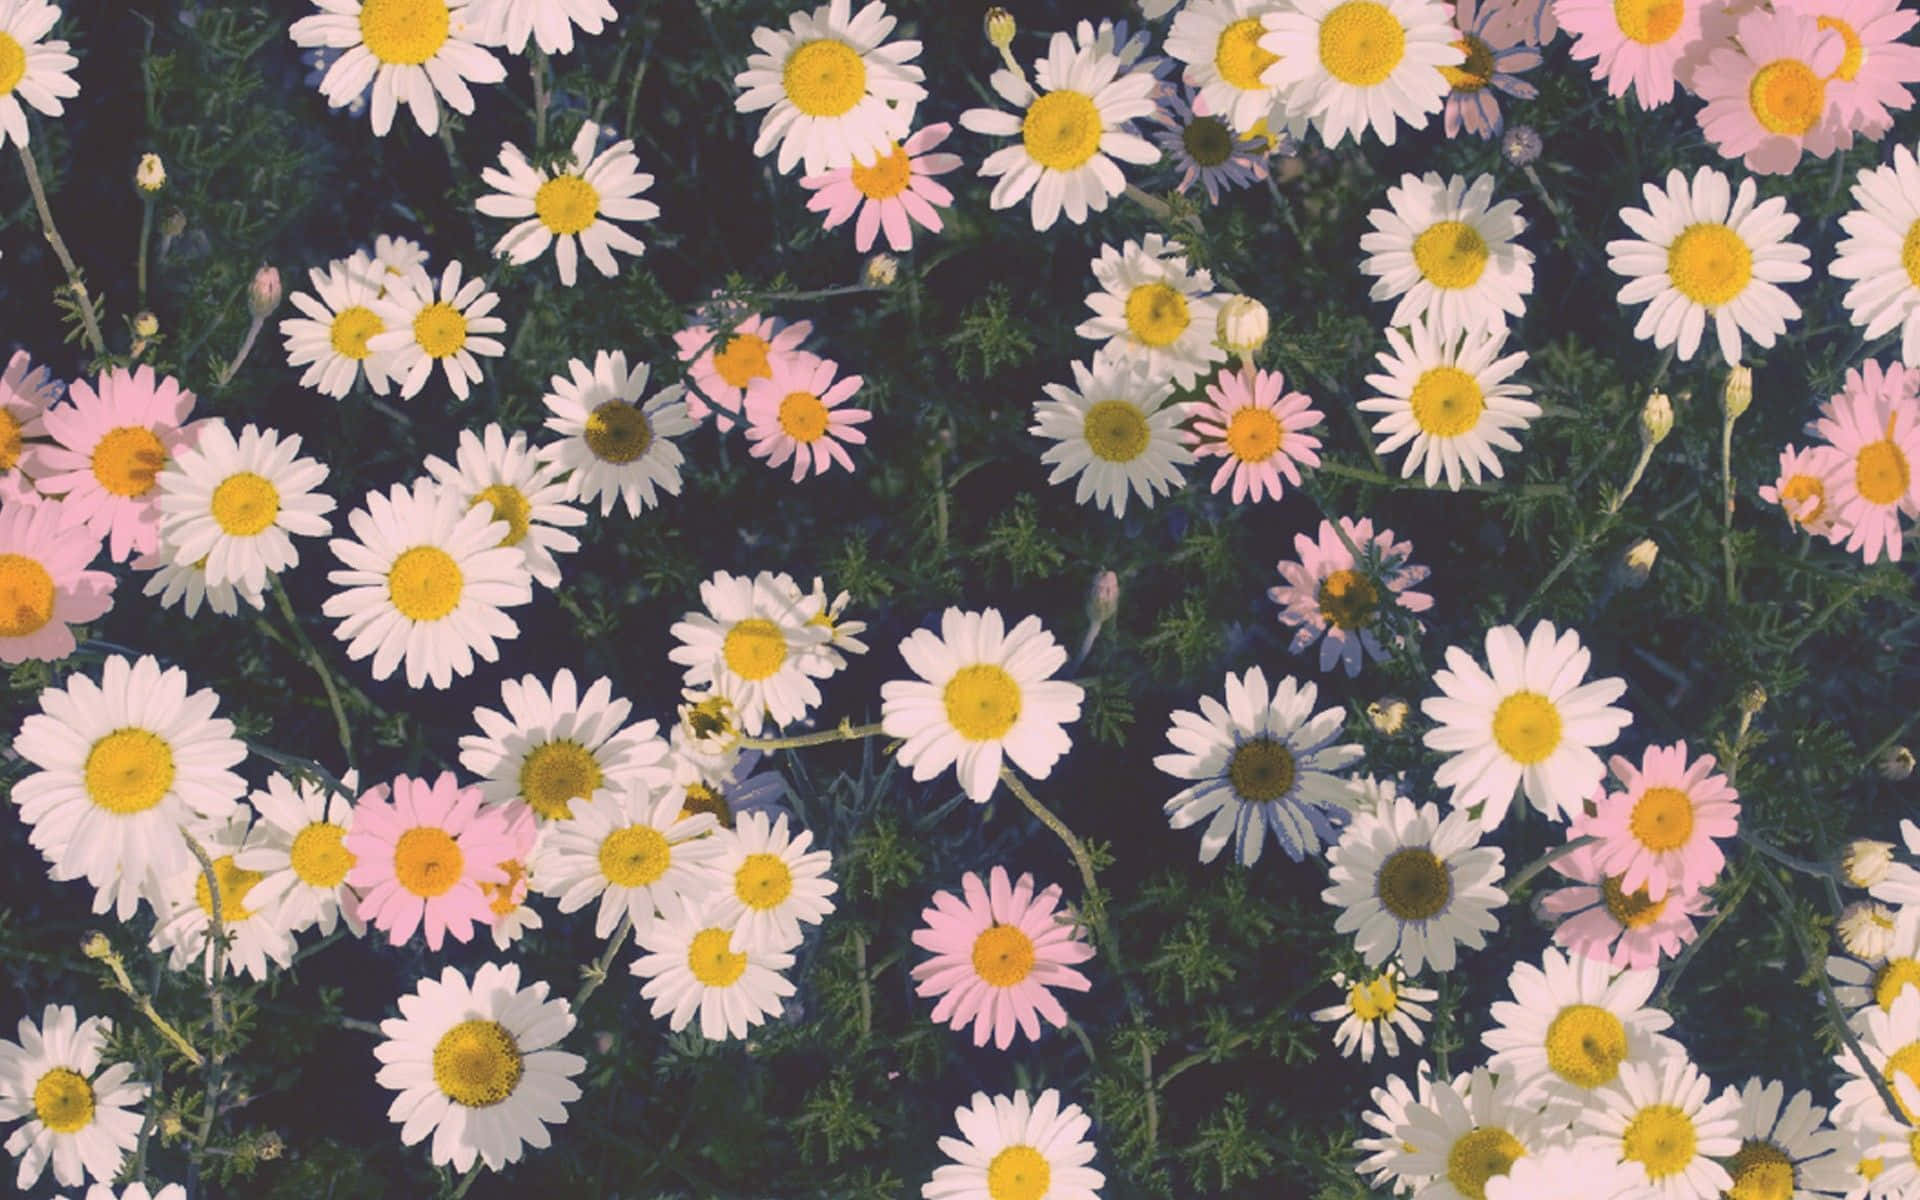 Daisies In The Field With A Black Background Wallpaper